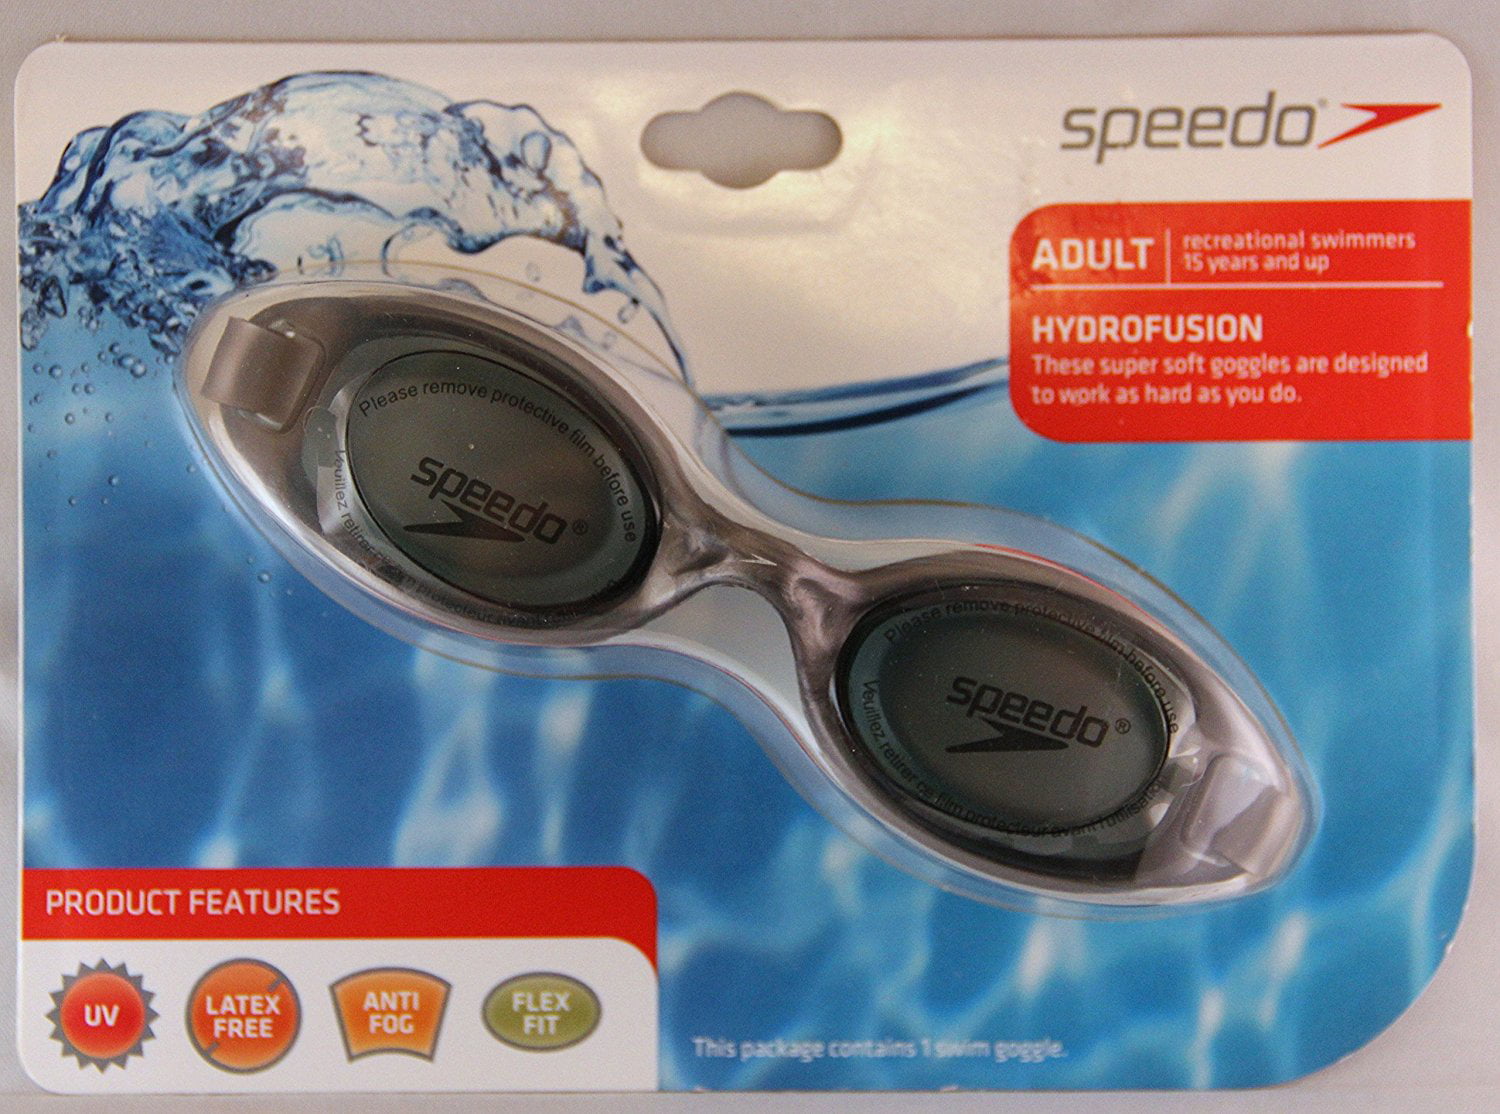 Speedo Hydrofusion Goggles Adult Swimmers 15 Years and up White for sale online 